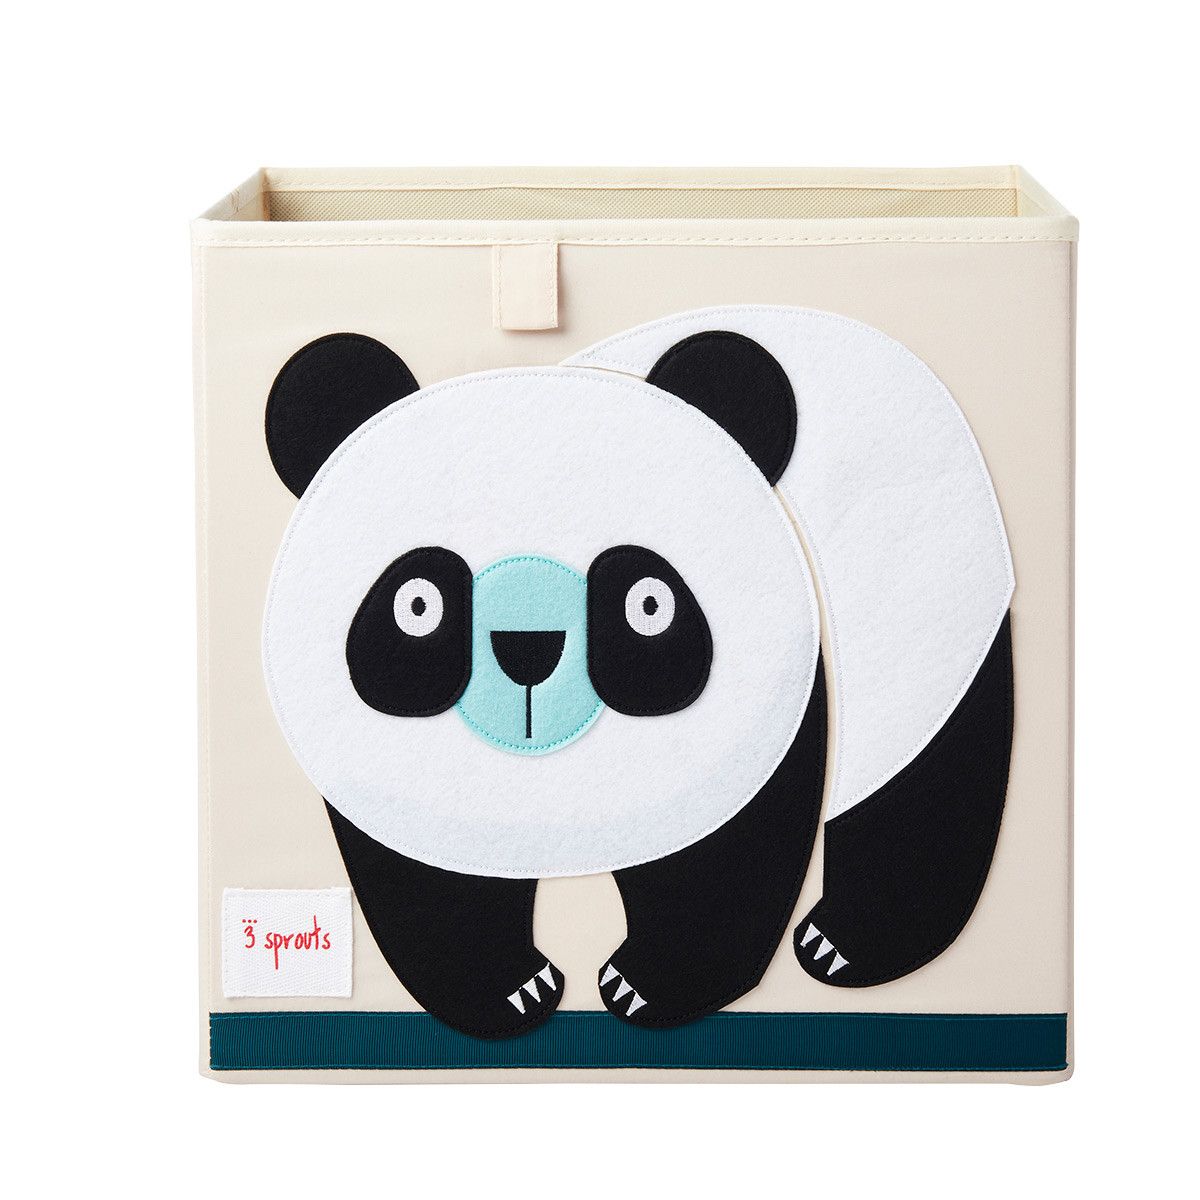 Panda - 3 Sprouts Storage Cube | The Container Store